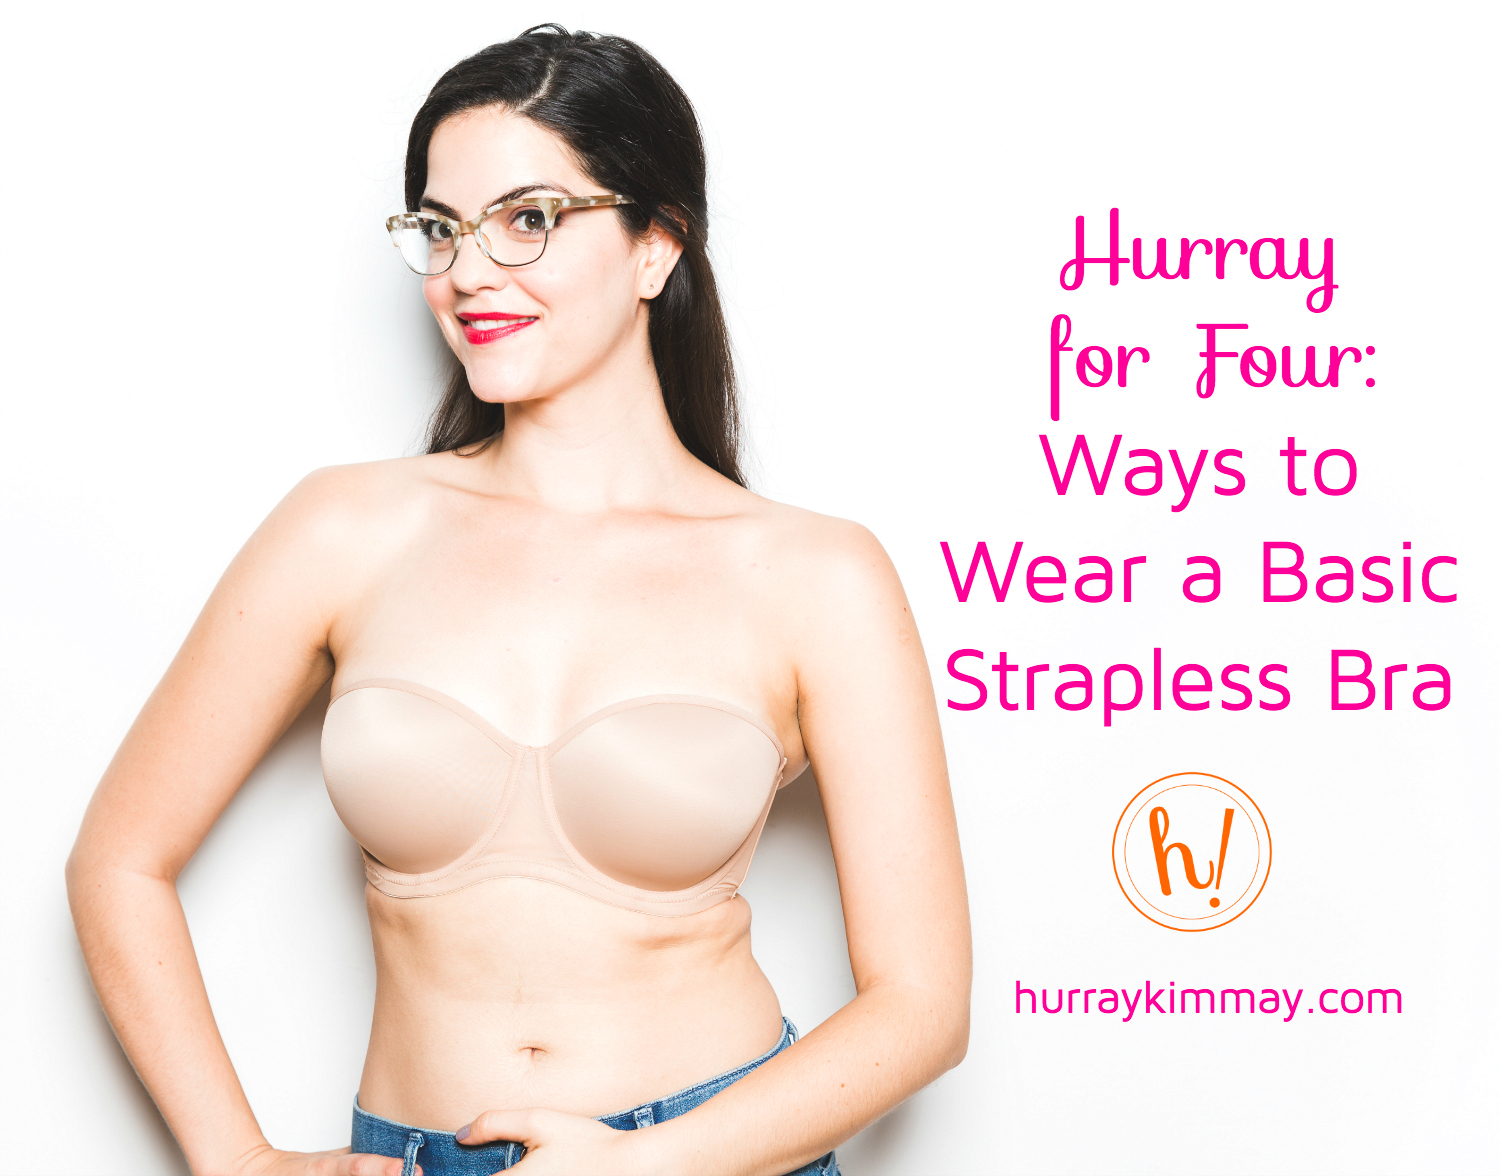 What Bra Should You Wear With A Halter Top? - Women's Blog on Bras & More:  Visit our Bra Blog